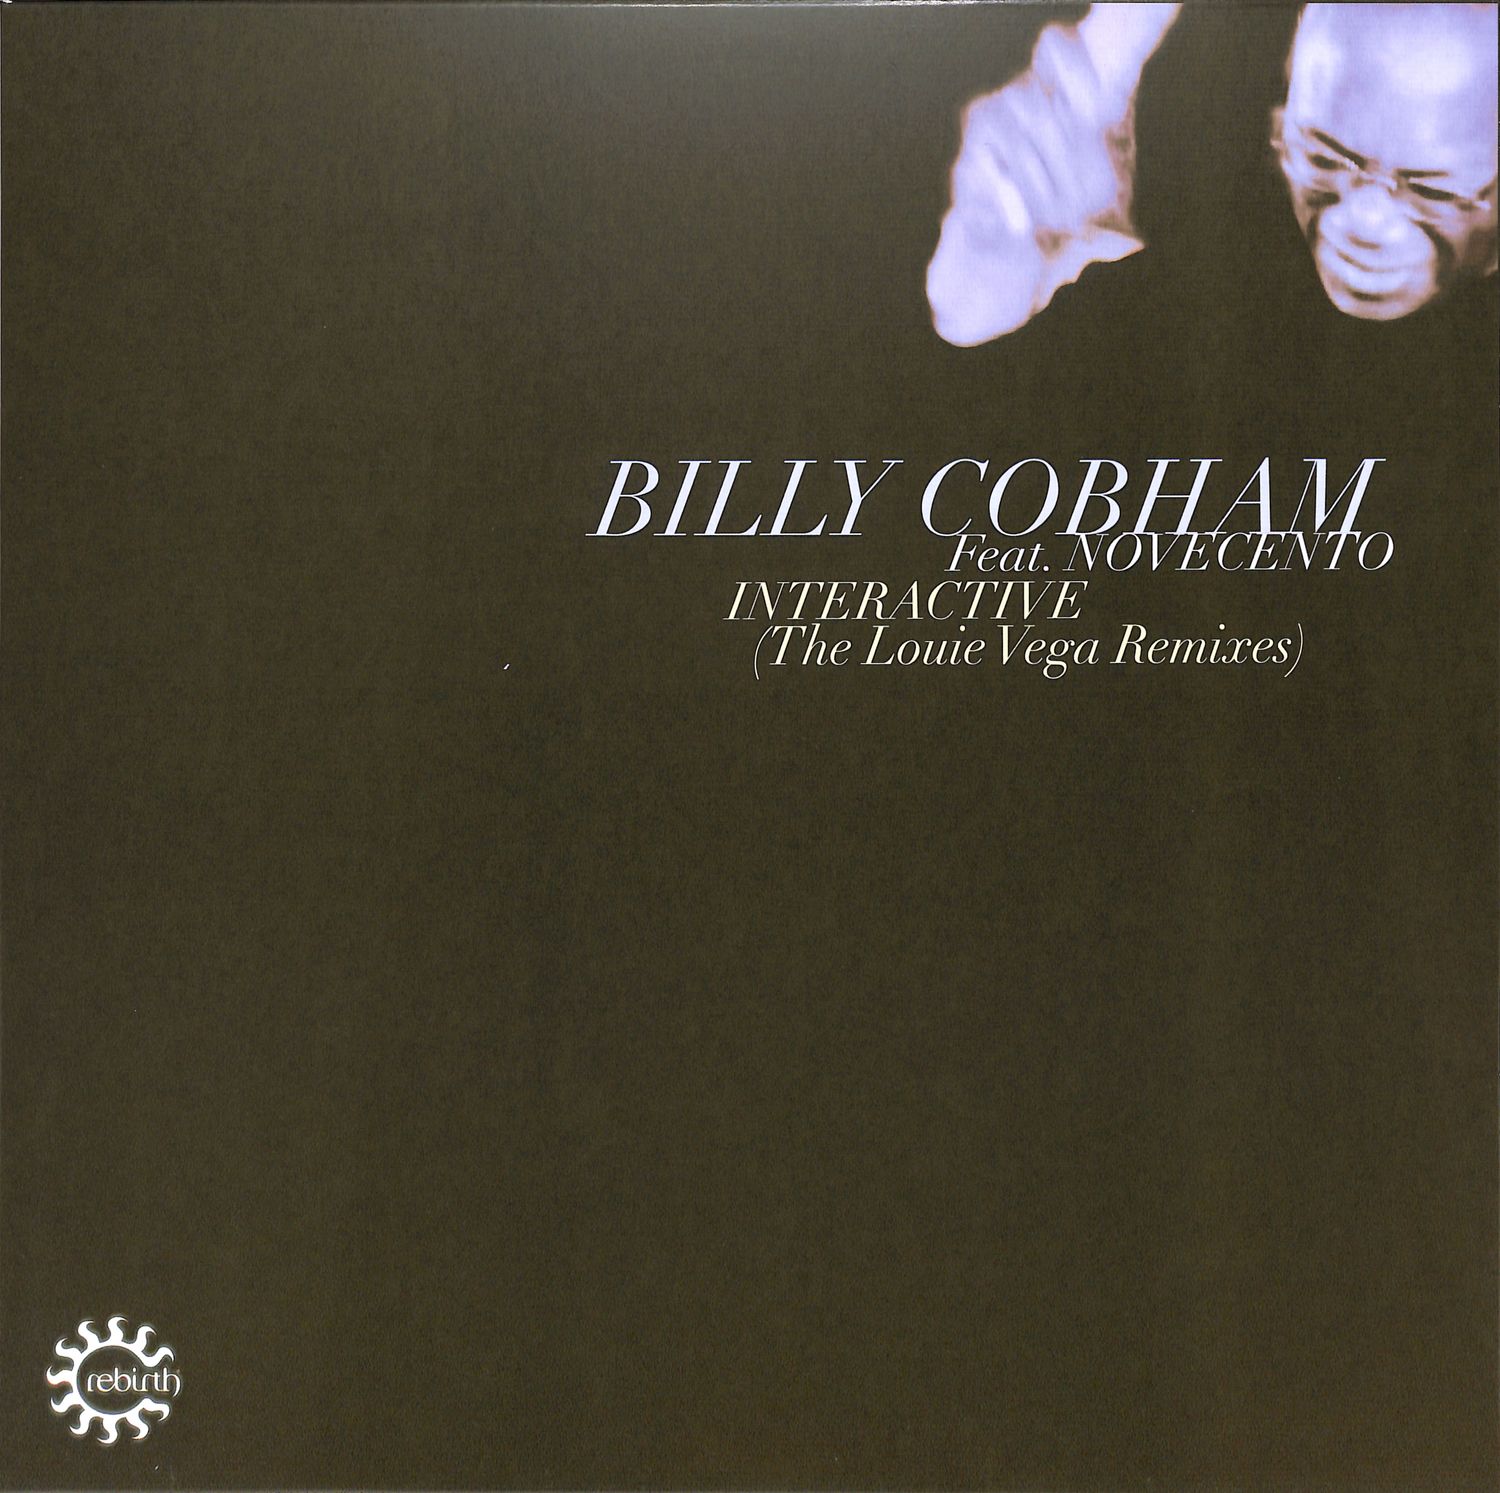 Billy Cobham featuring Novecento - INTERACTIVE 